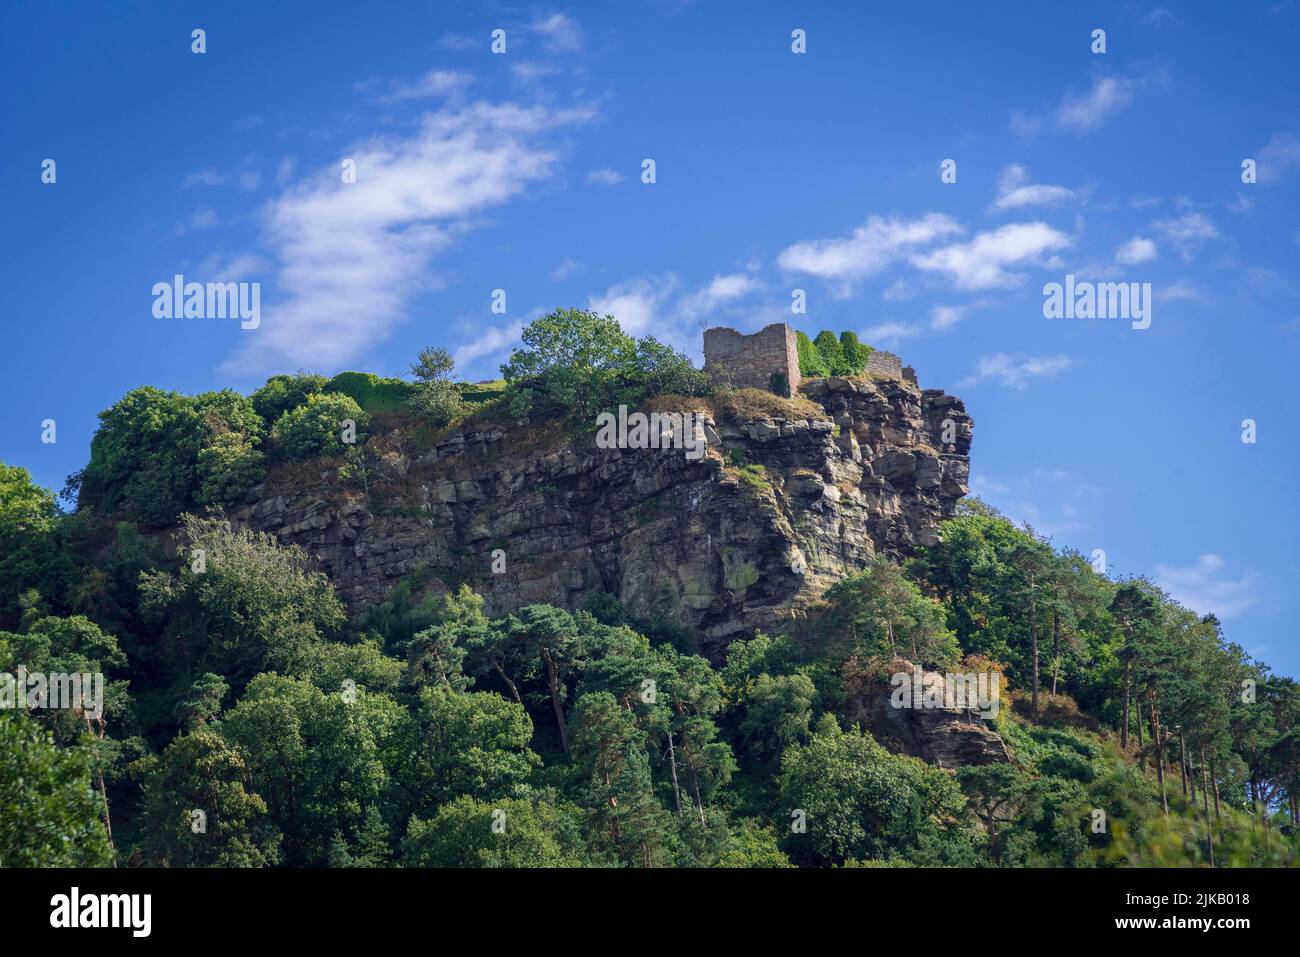 Beeston castle high on its hilltop in the Cheshire plain.It was built in the 1220s by Ranulf de Blondeville, 6th Earl of Chester, Stock Photo